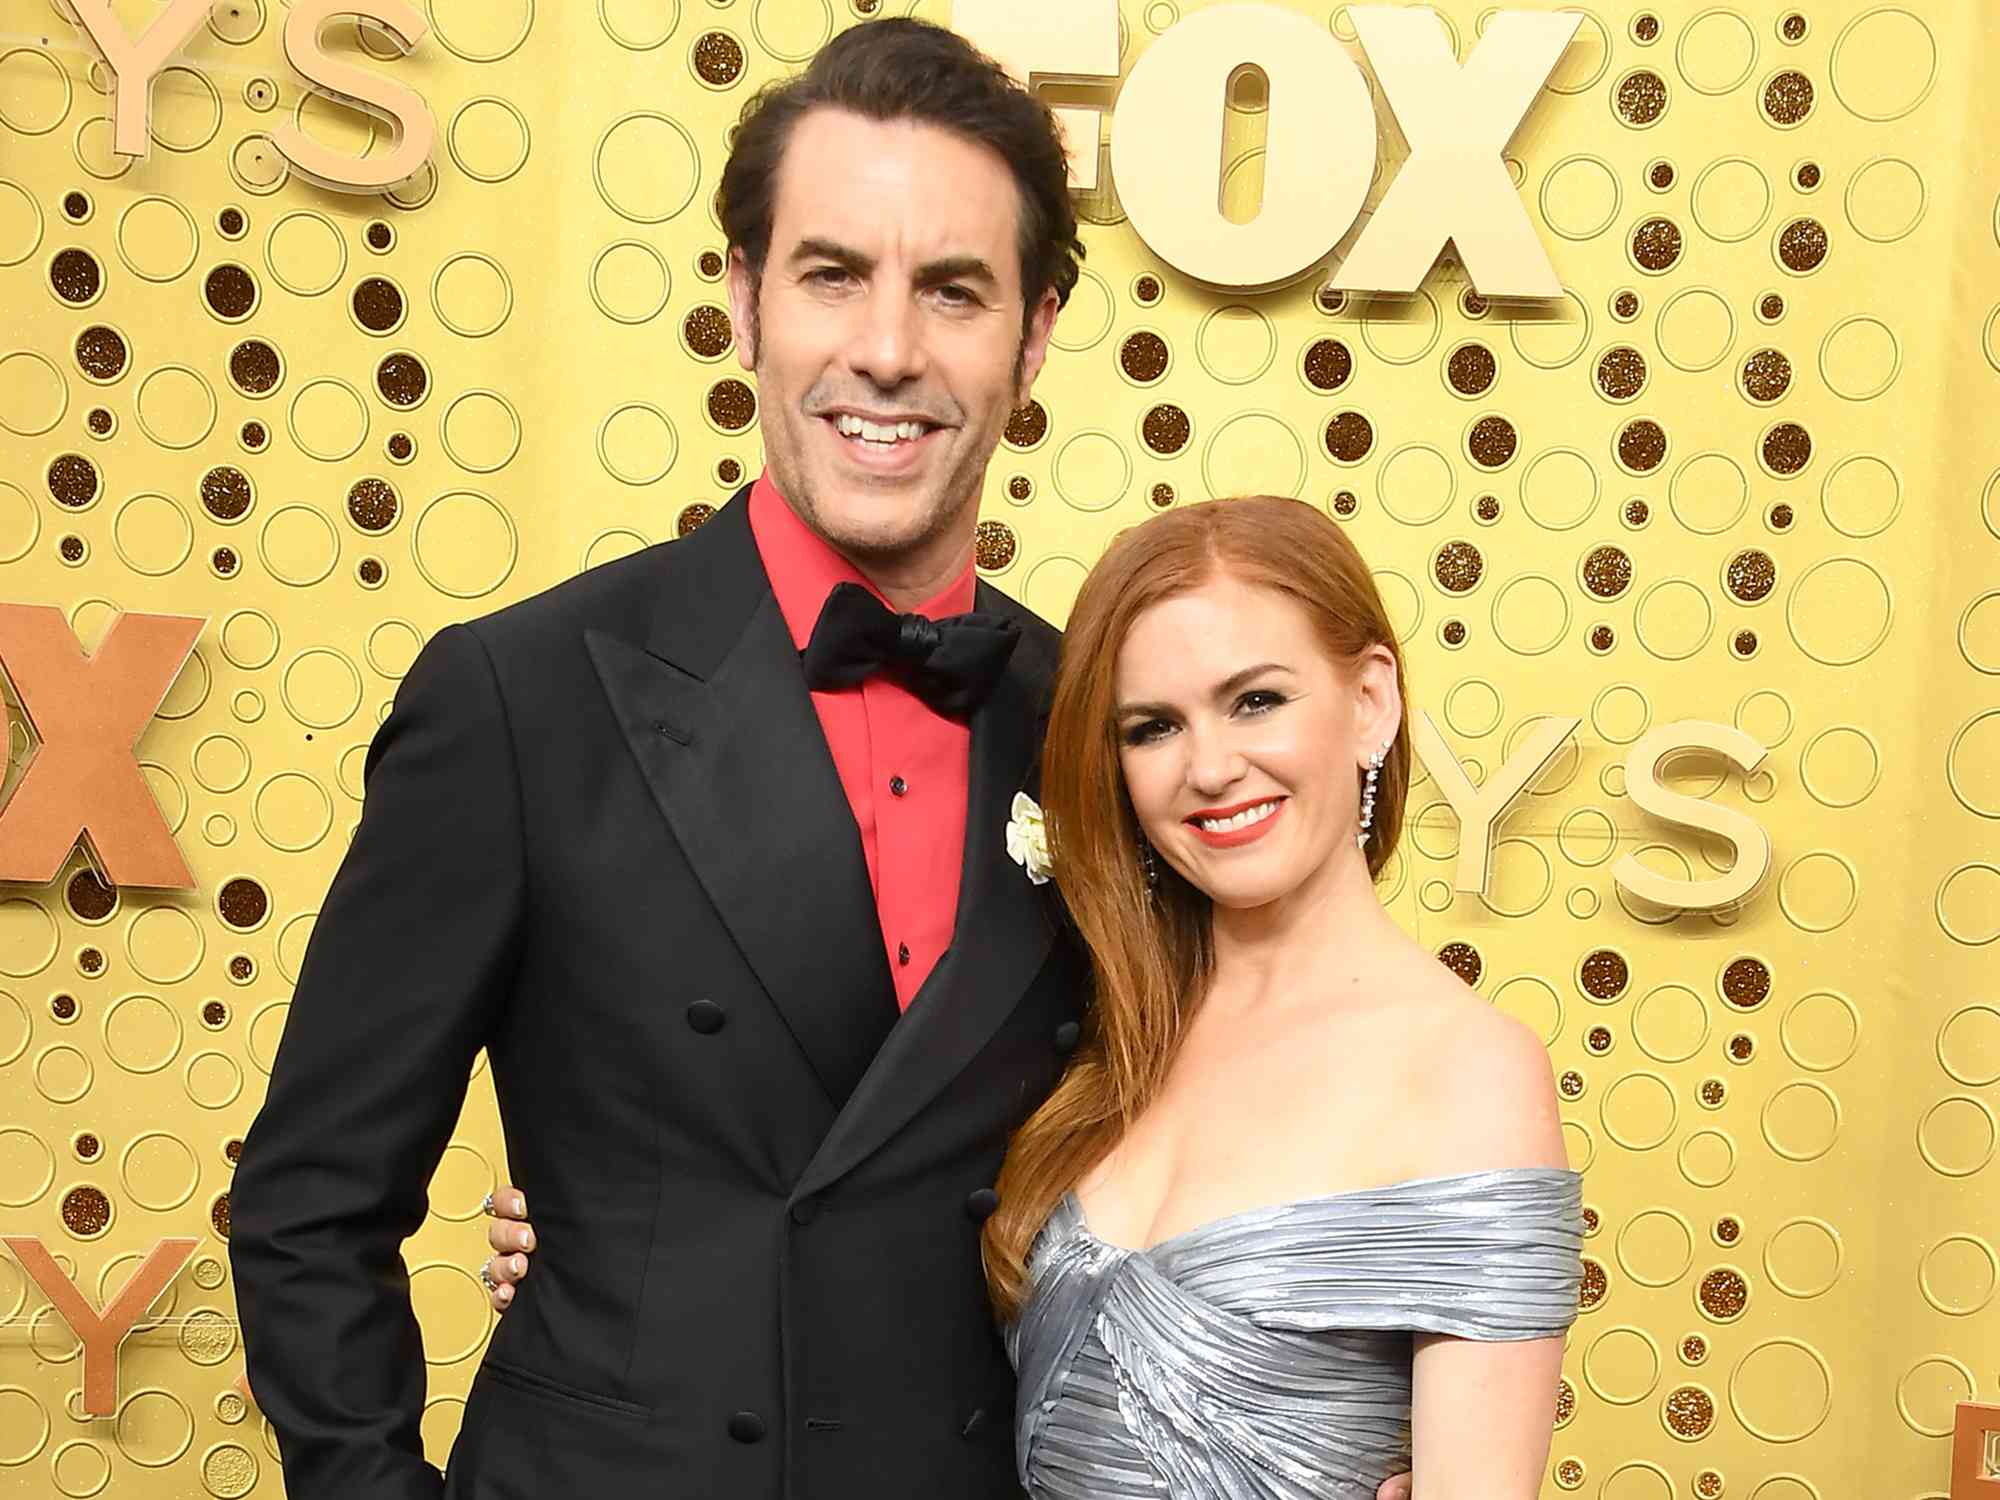 Sacha Baron Cohen and Isla Fisher arrive at the 71st Emmy Awards on September 22, 2019 in Los Angeles, California